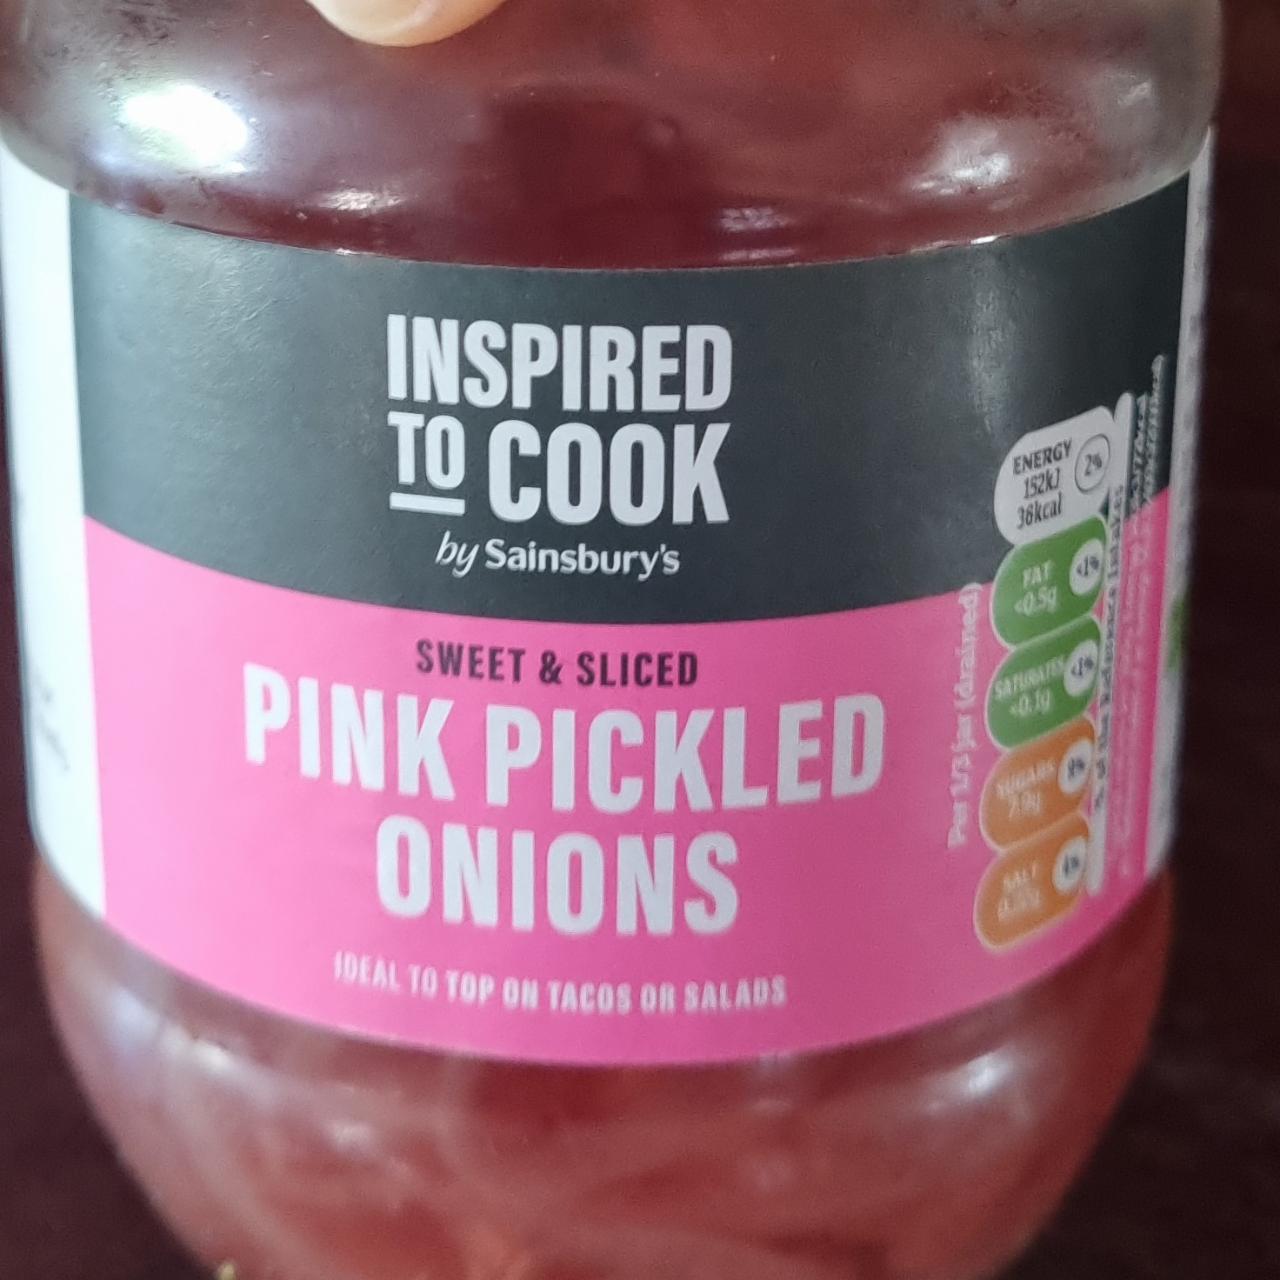 Fotografie - Sweet & sliced pink pickled onions inspired to cook by Sainsbury's